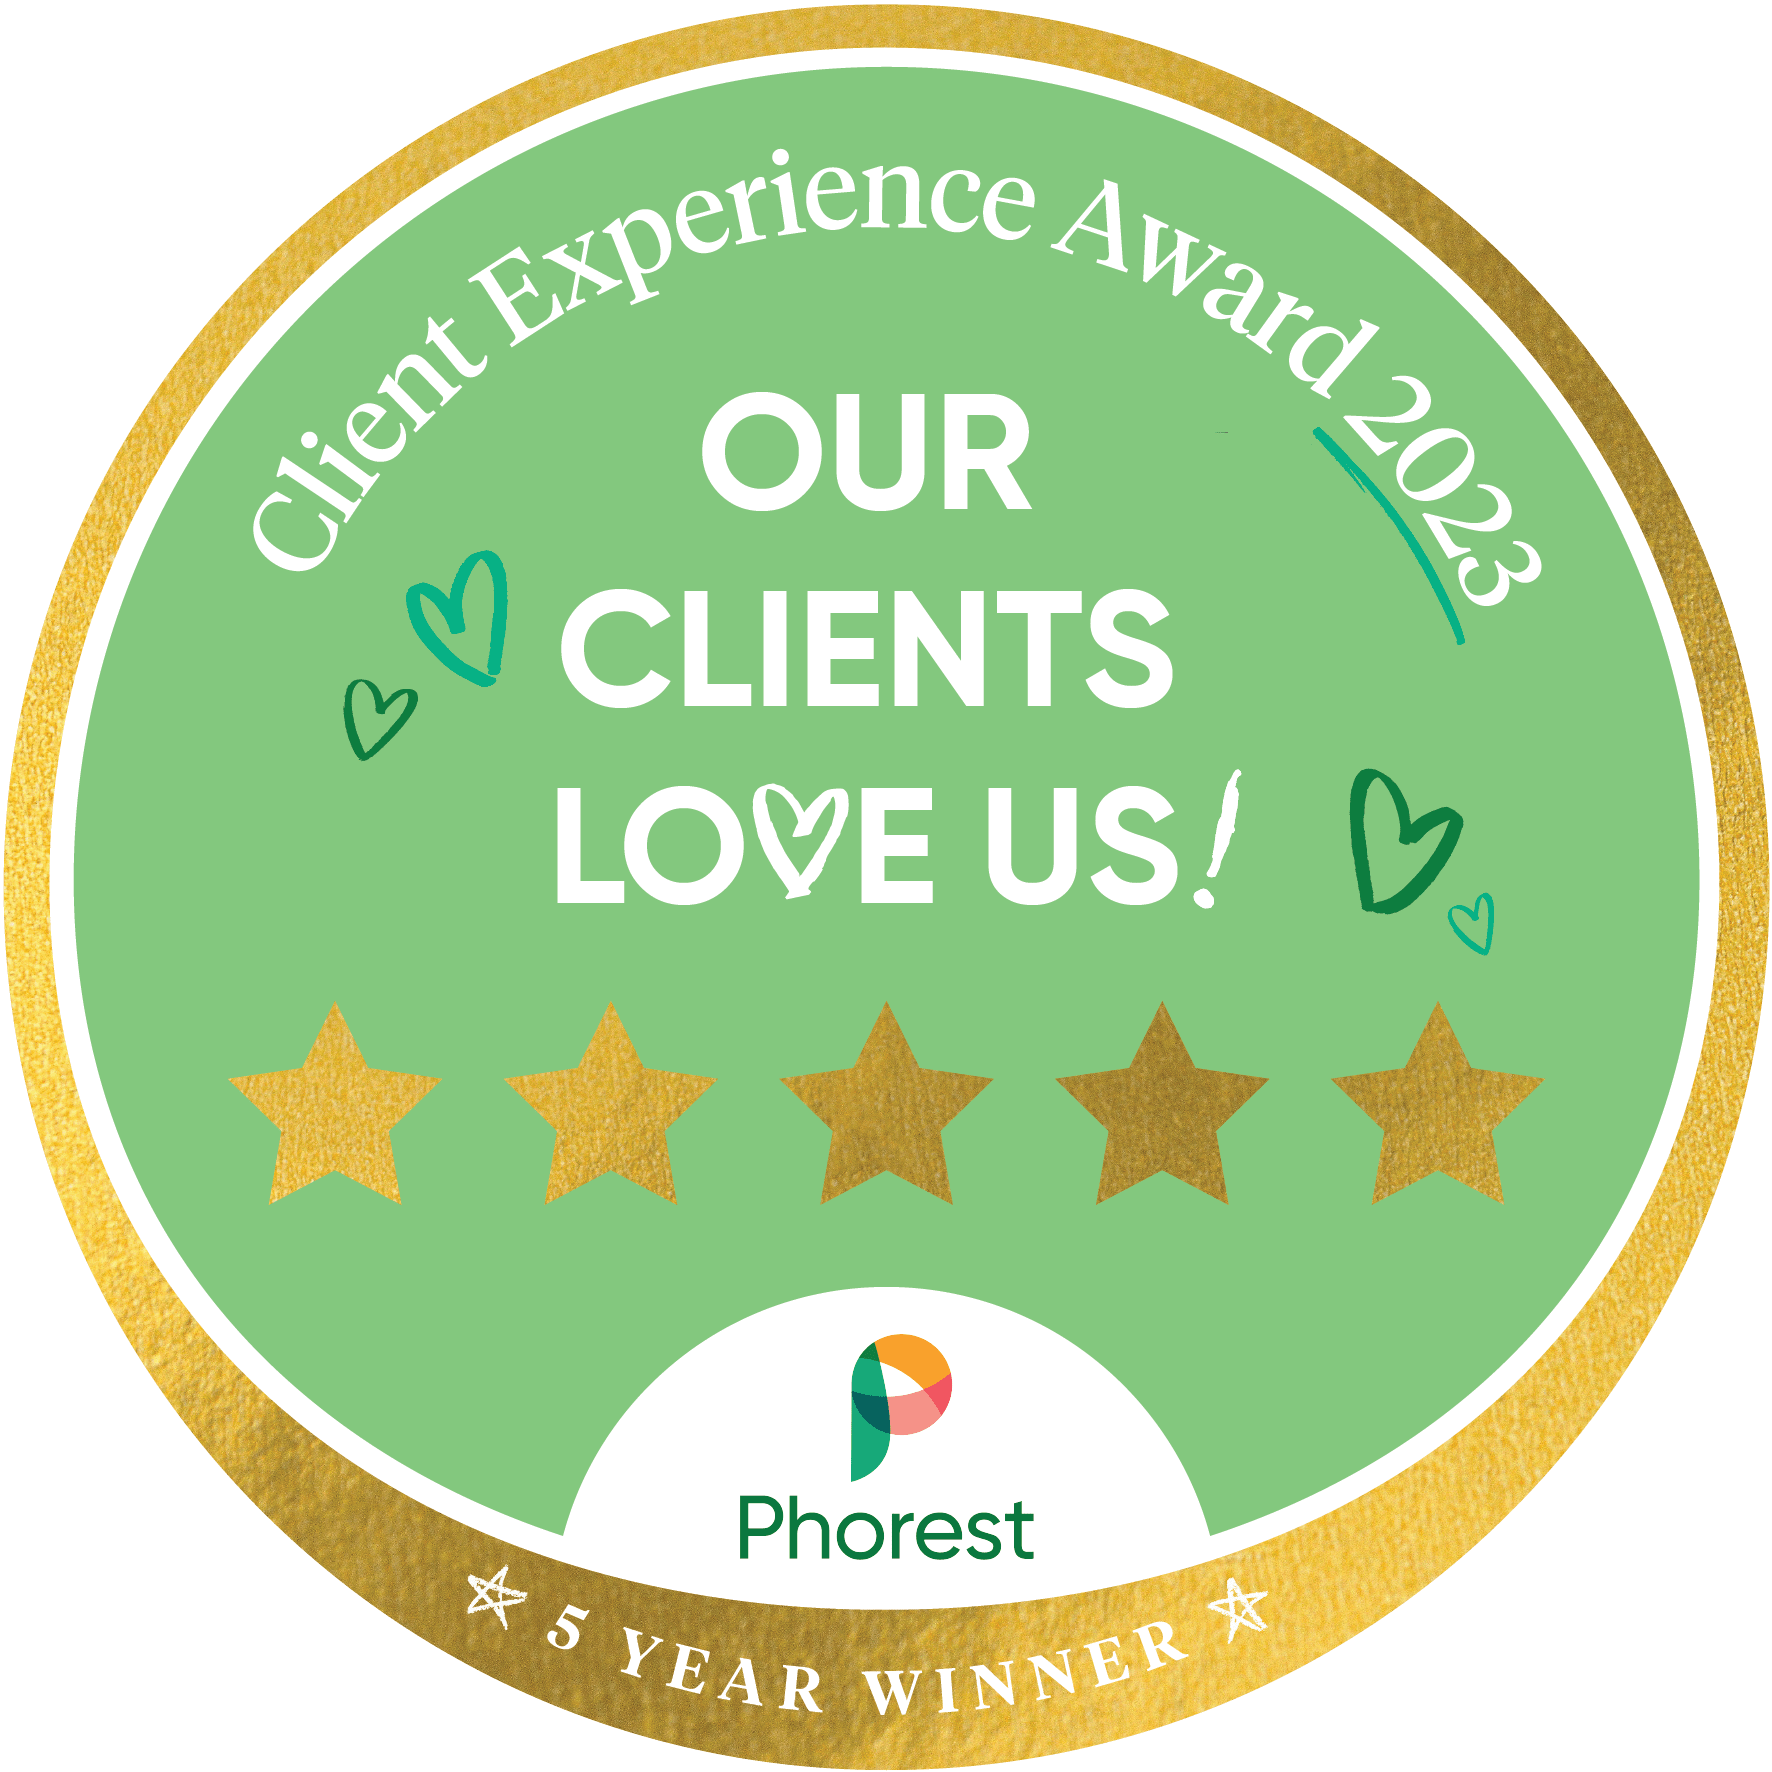 5 Year Winner of Client Experience Award 2023